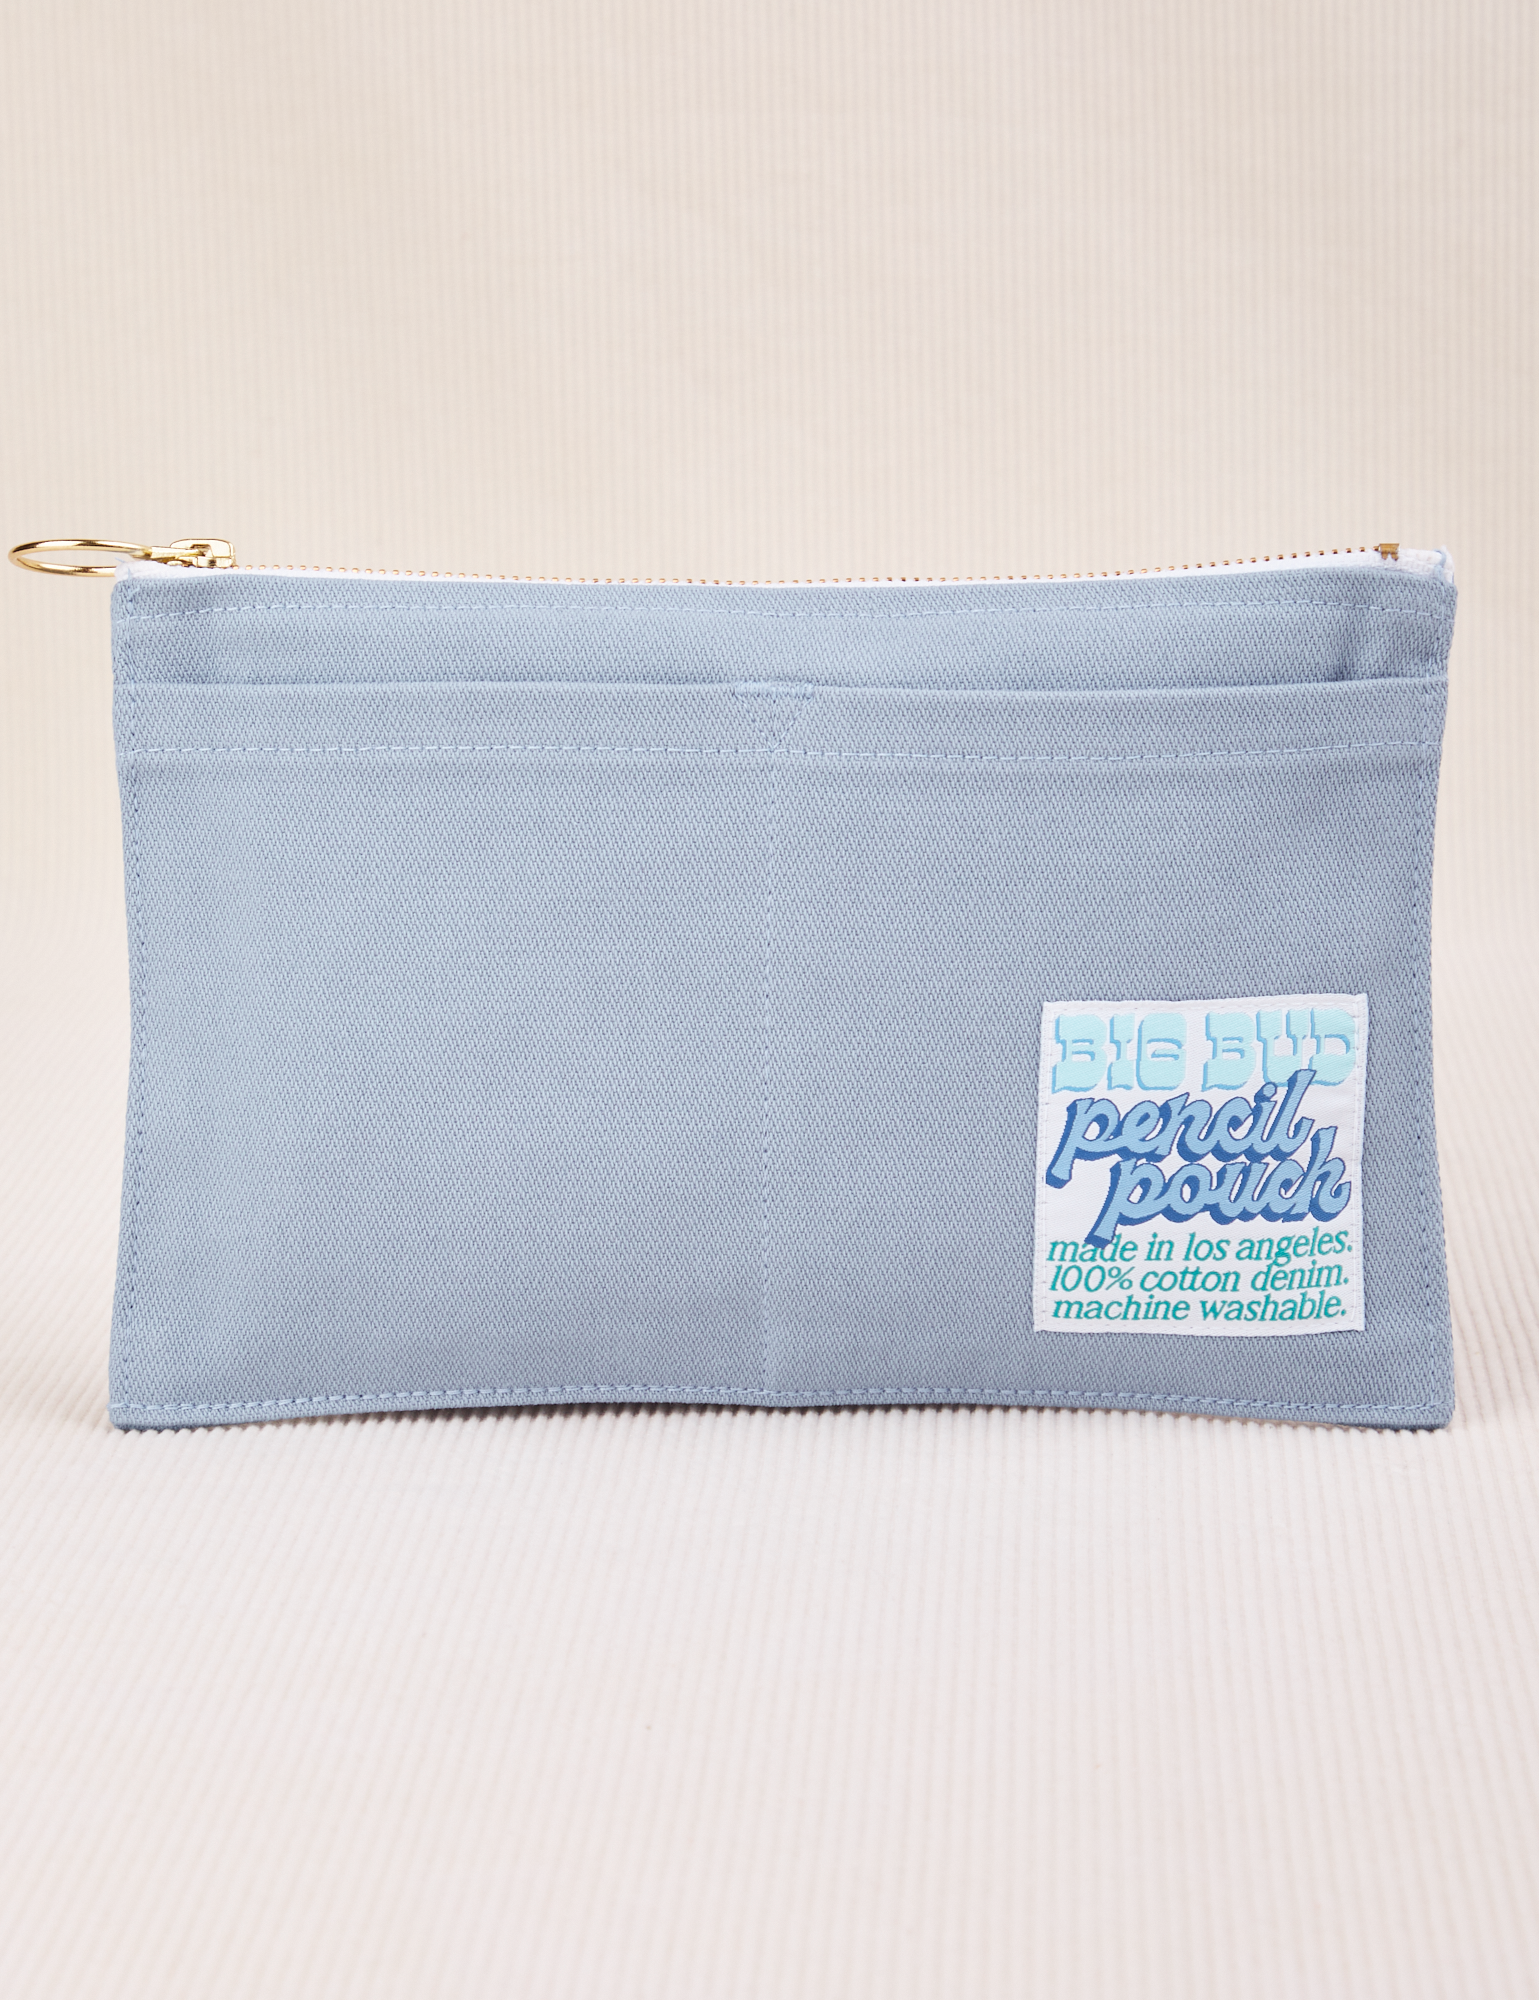 Pencil Pouch in Periwinkle